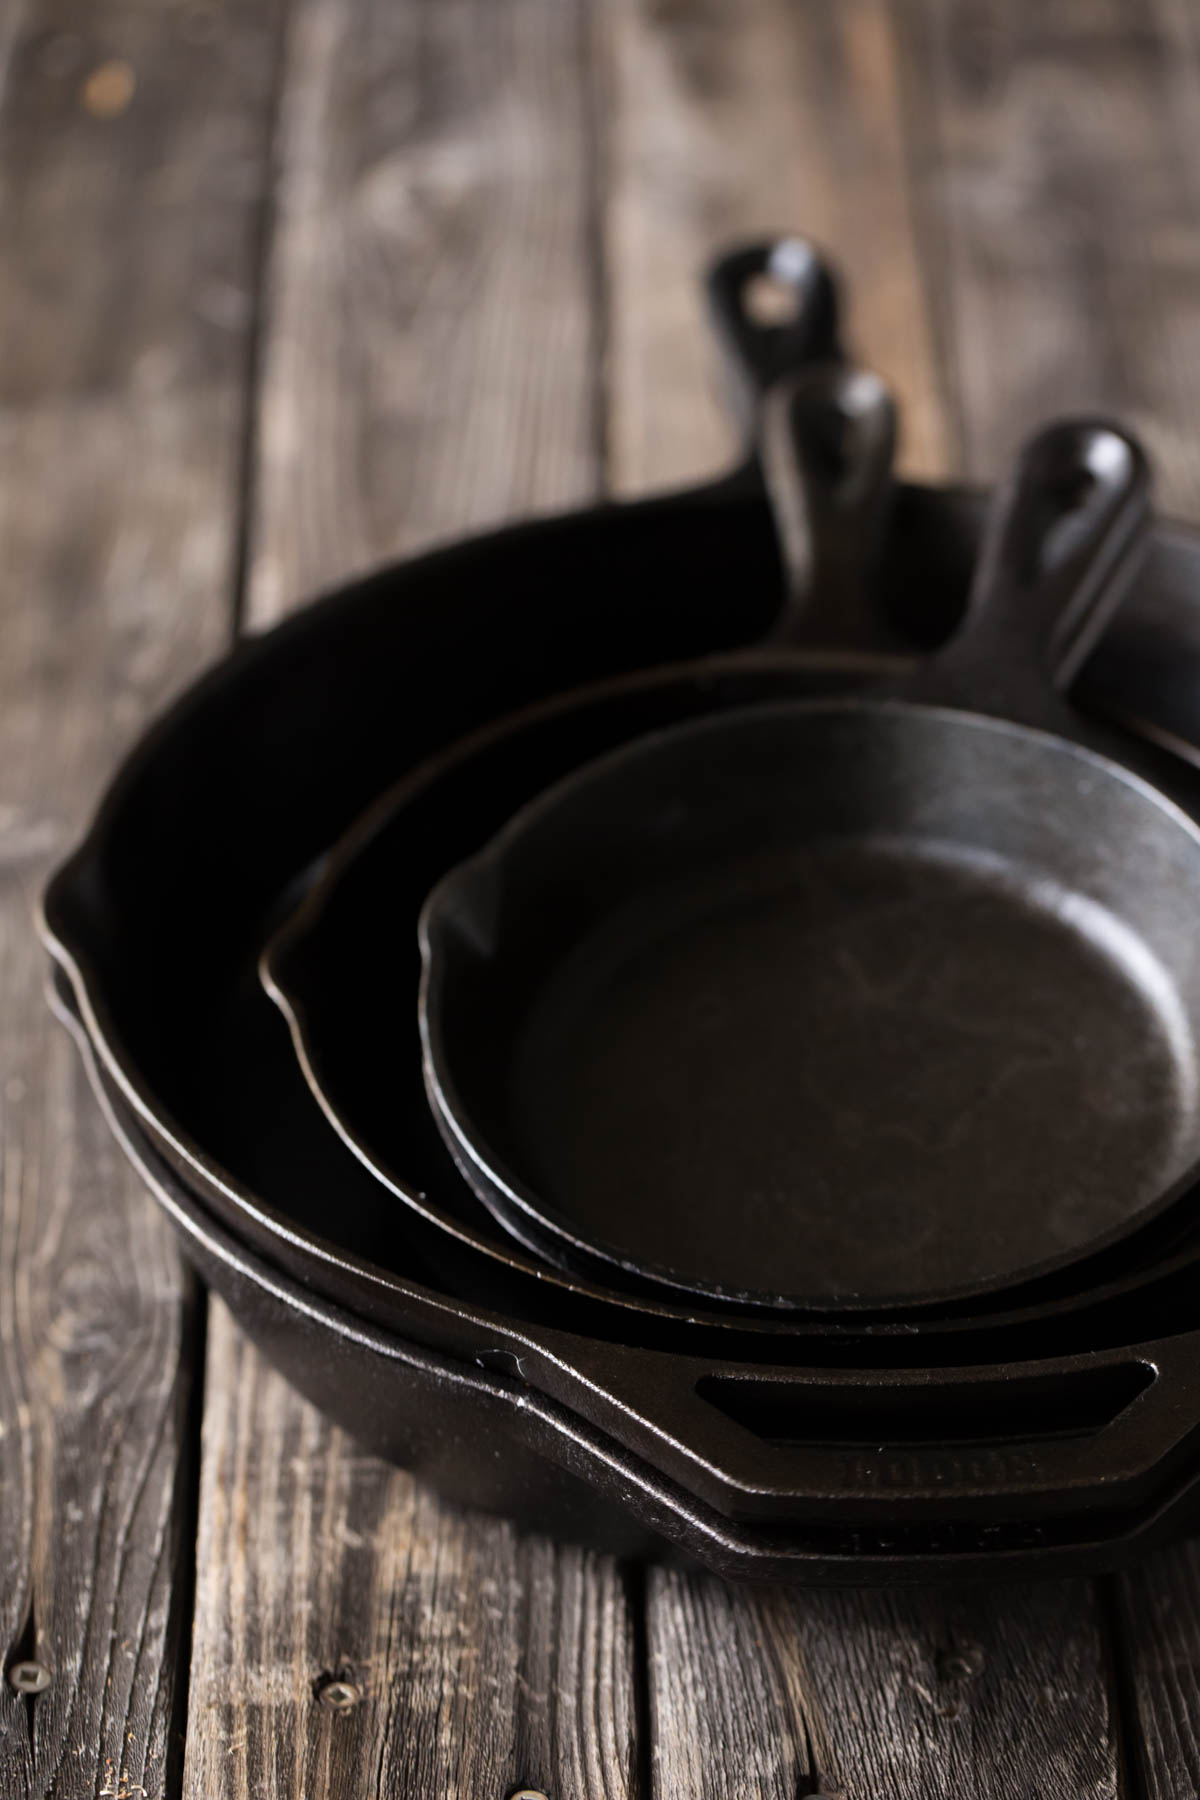 Five cast iron skillets stacked on a wooden board. 